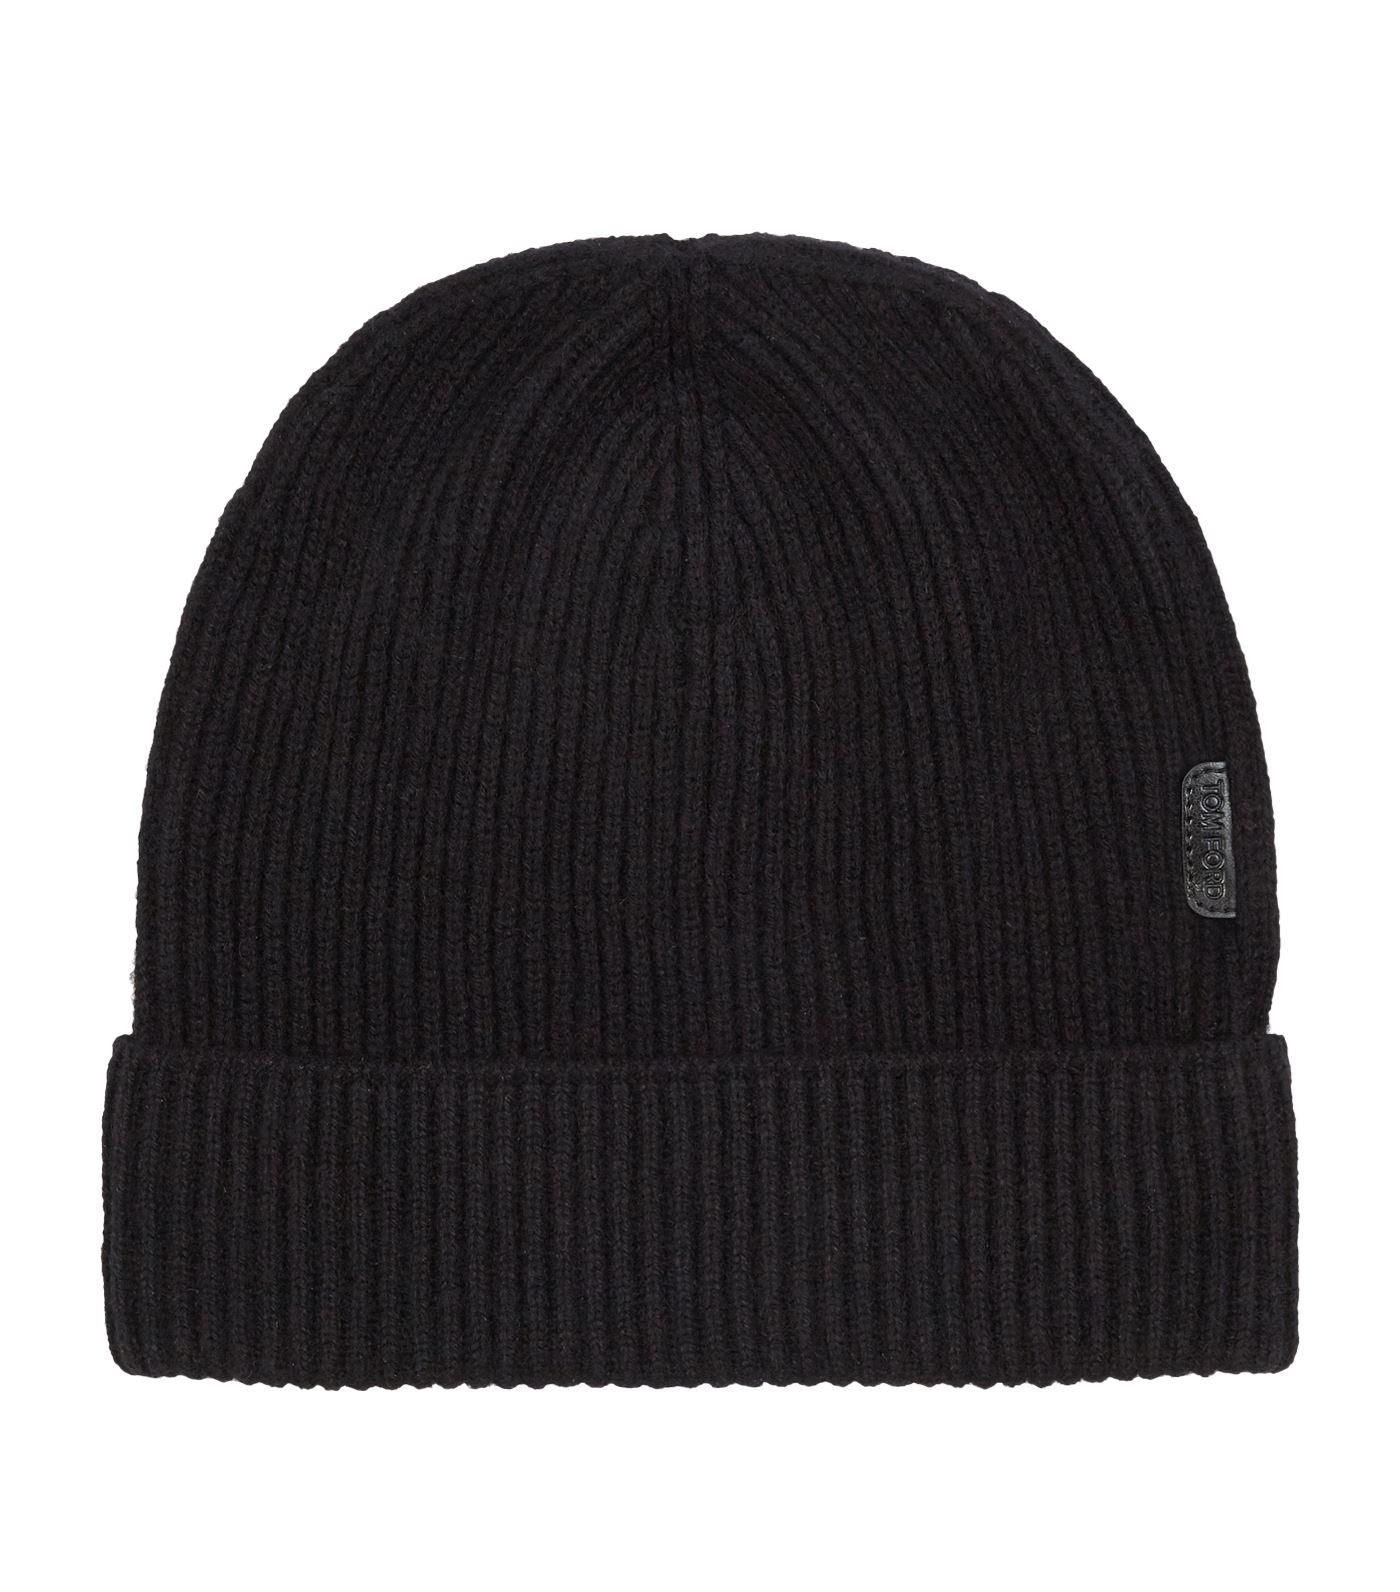 Tom Ford Cashmere Ribbed Beanie Hat in Black for Men - Lyst